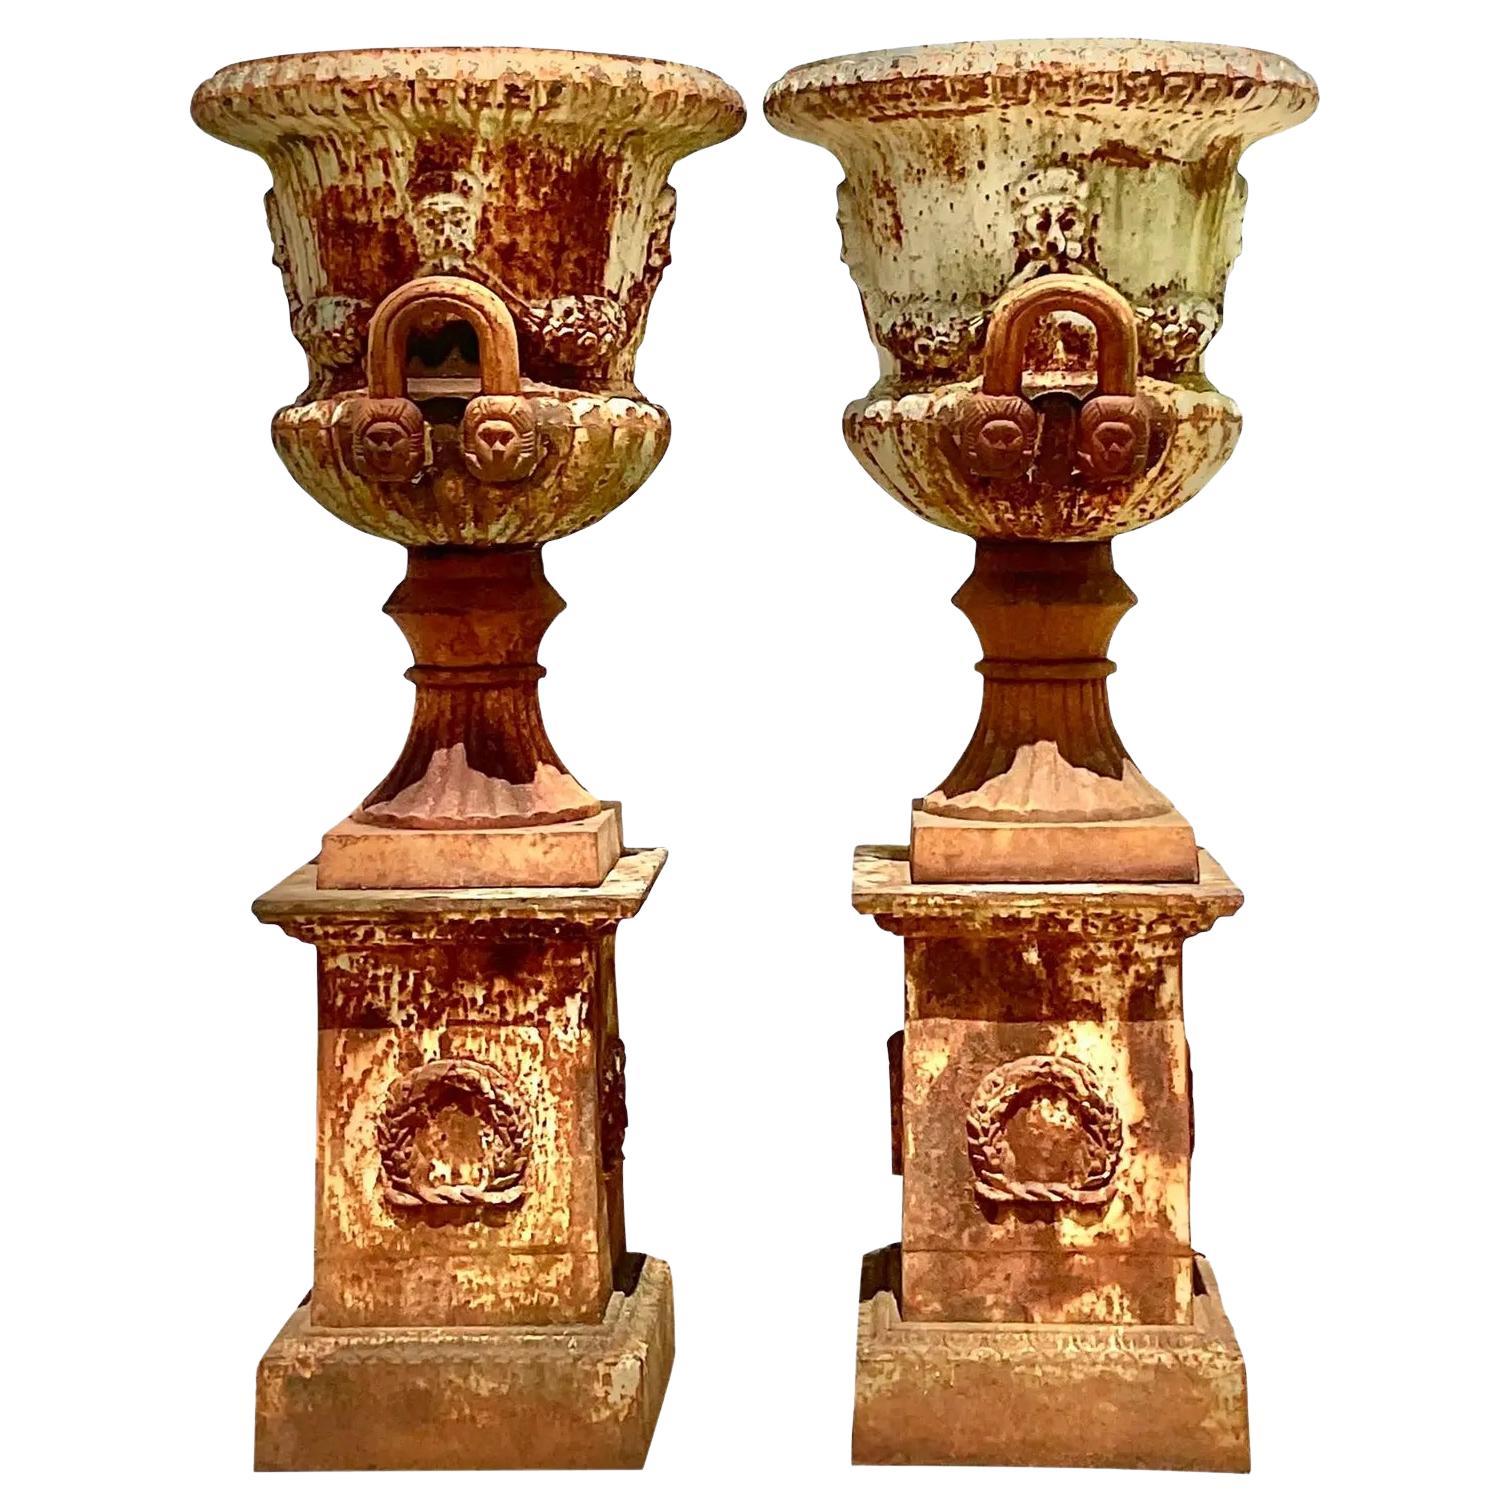 Vintage Monumental Wrought Iron Urns - a Pair For Sale